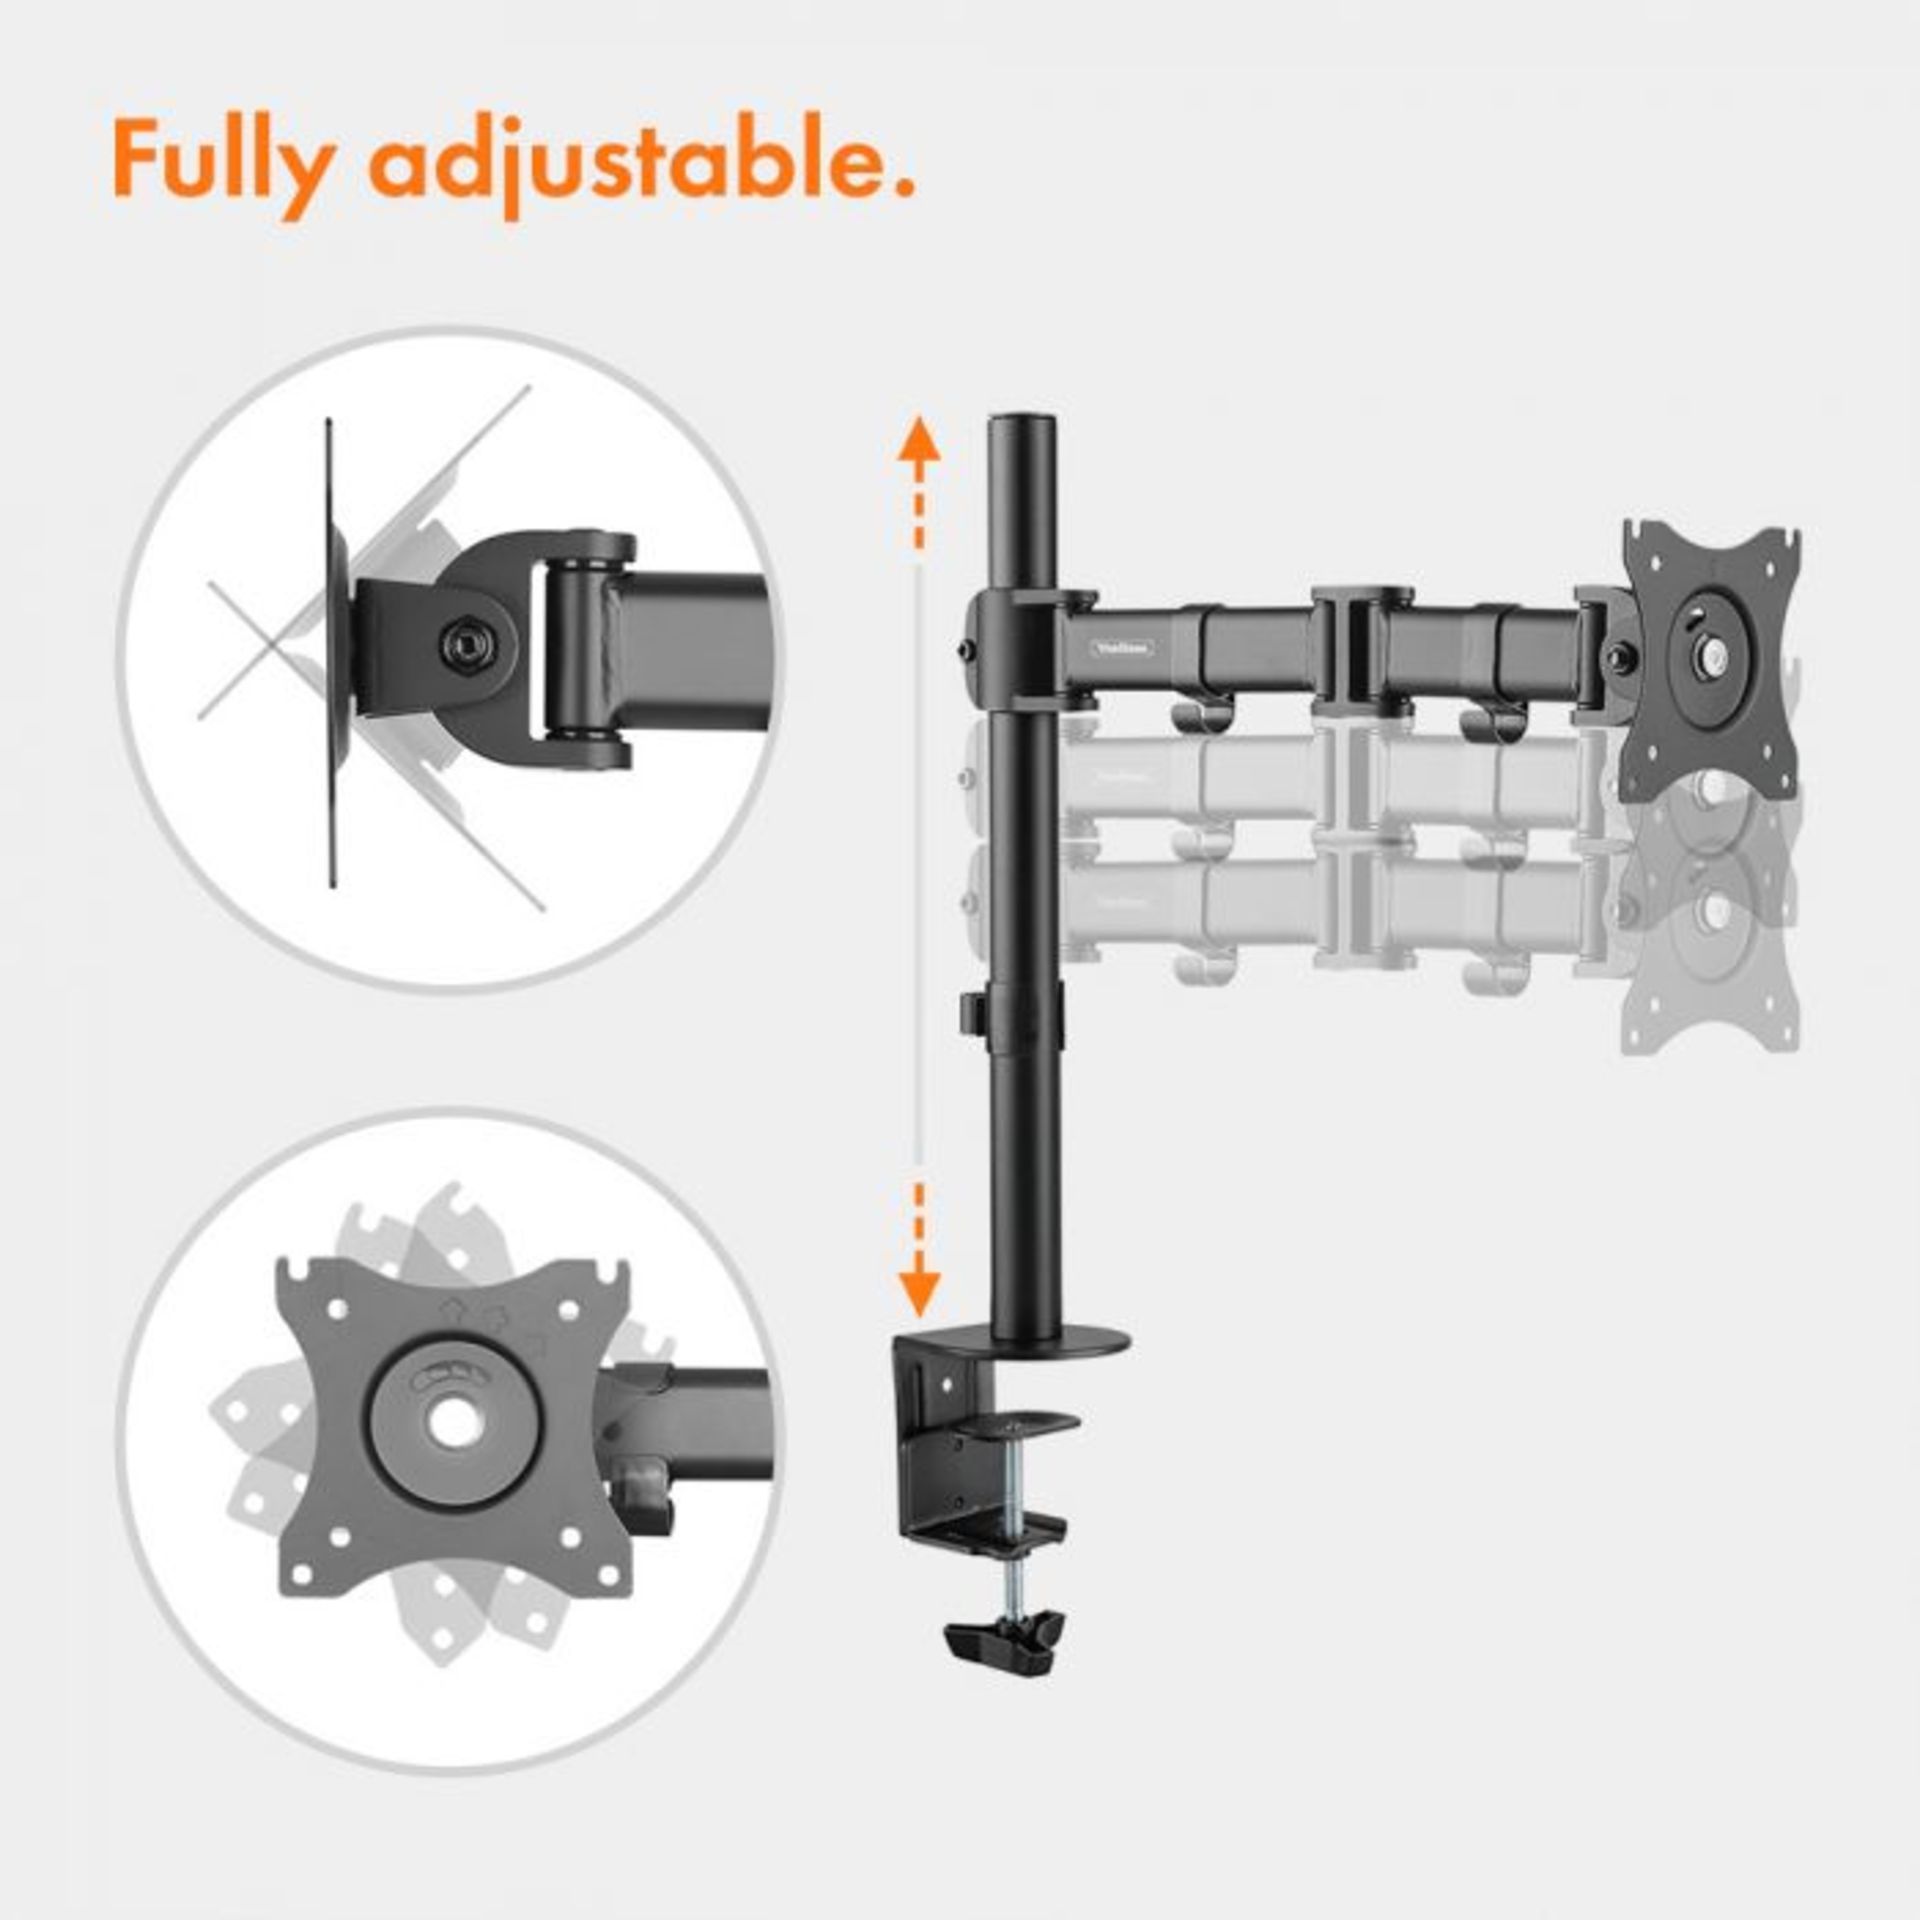 (S4) Single Monitor Mount with Clamp Equipped with 90° tilt, 180° swivel and 360° rotation ... - Image 3 of 4